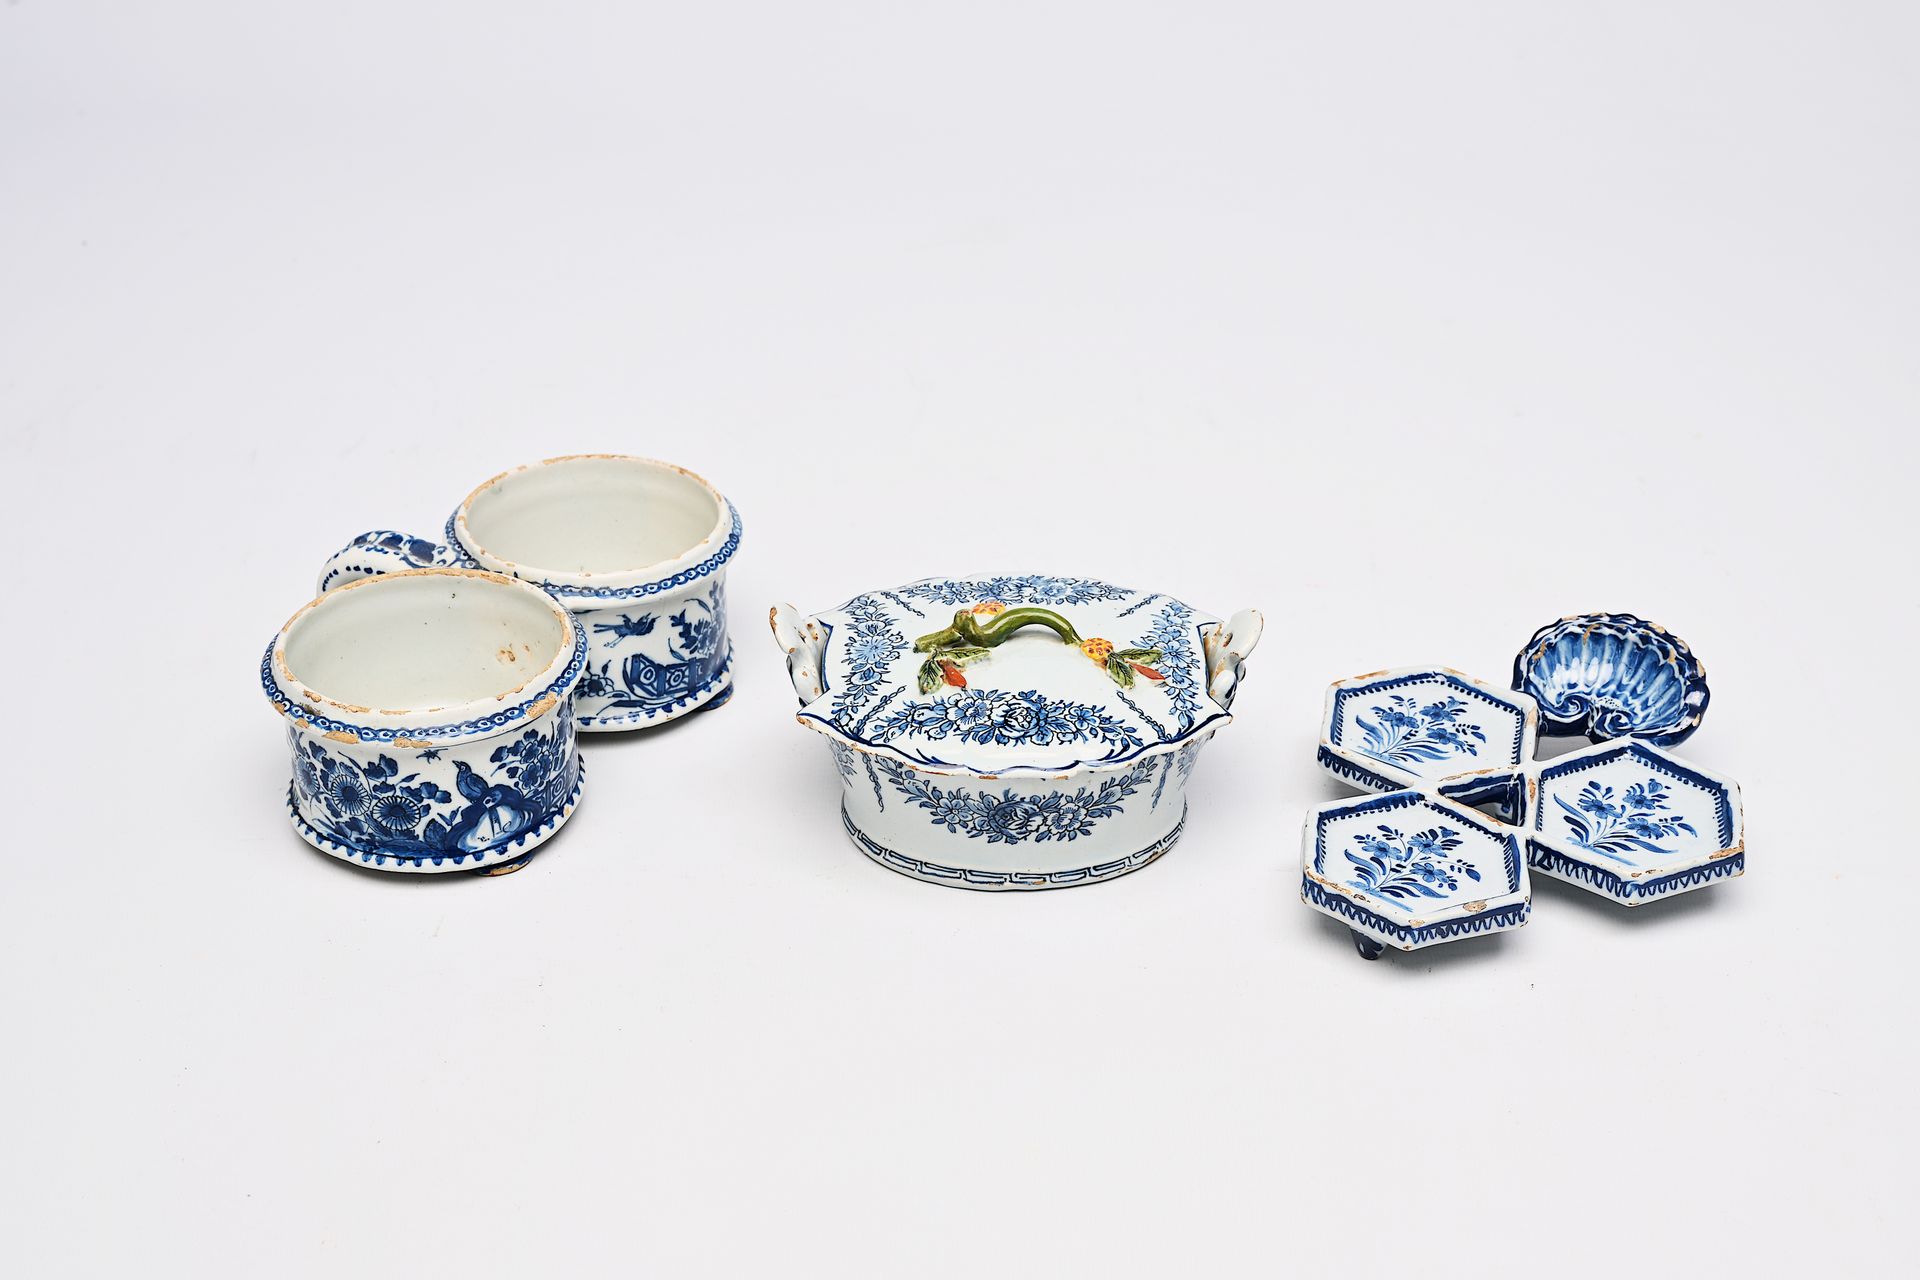 A Dutch Delft blue and white butter tub, an oil and vinegar holder and a spice d&hellip;